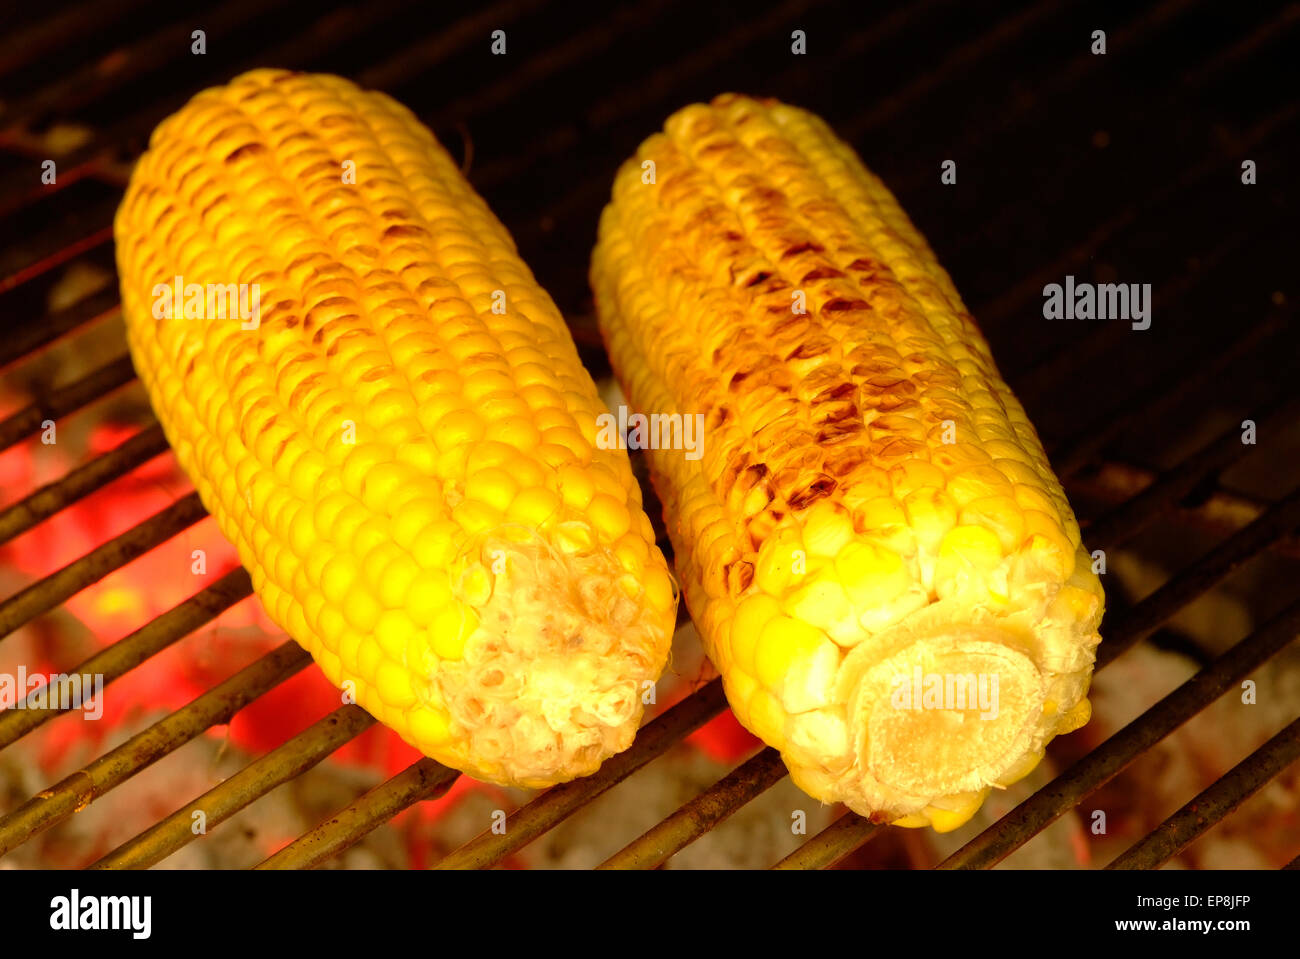 Mielies or corn on the cob is often cooked on open fire in South Africa Stock Photo